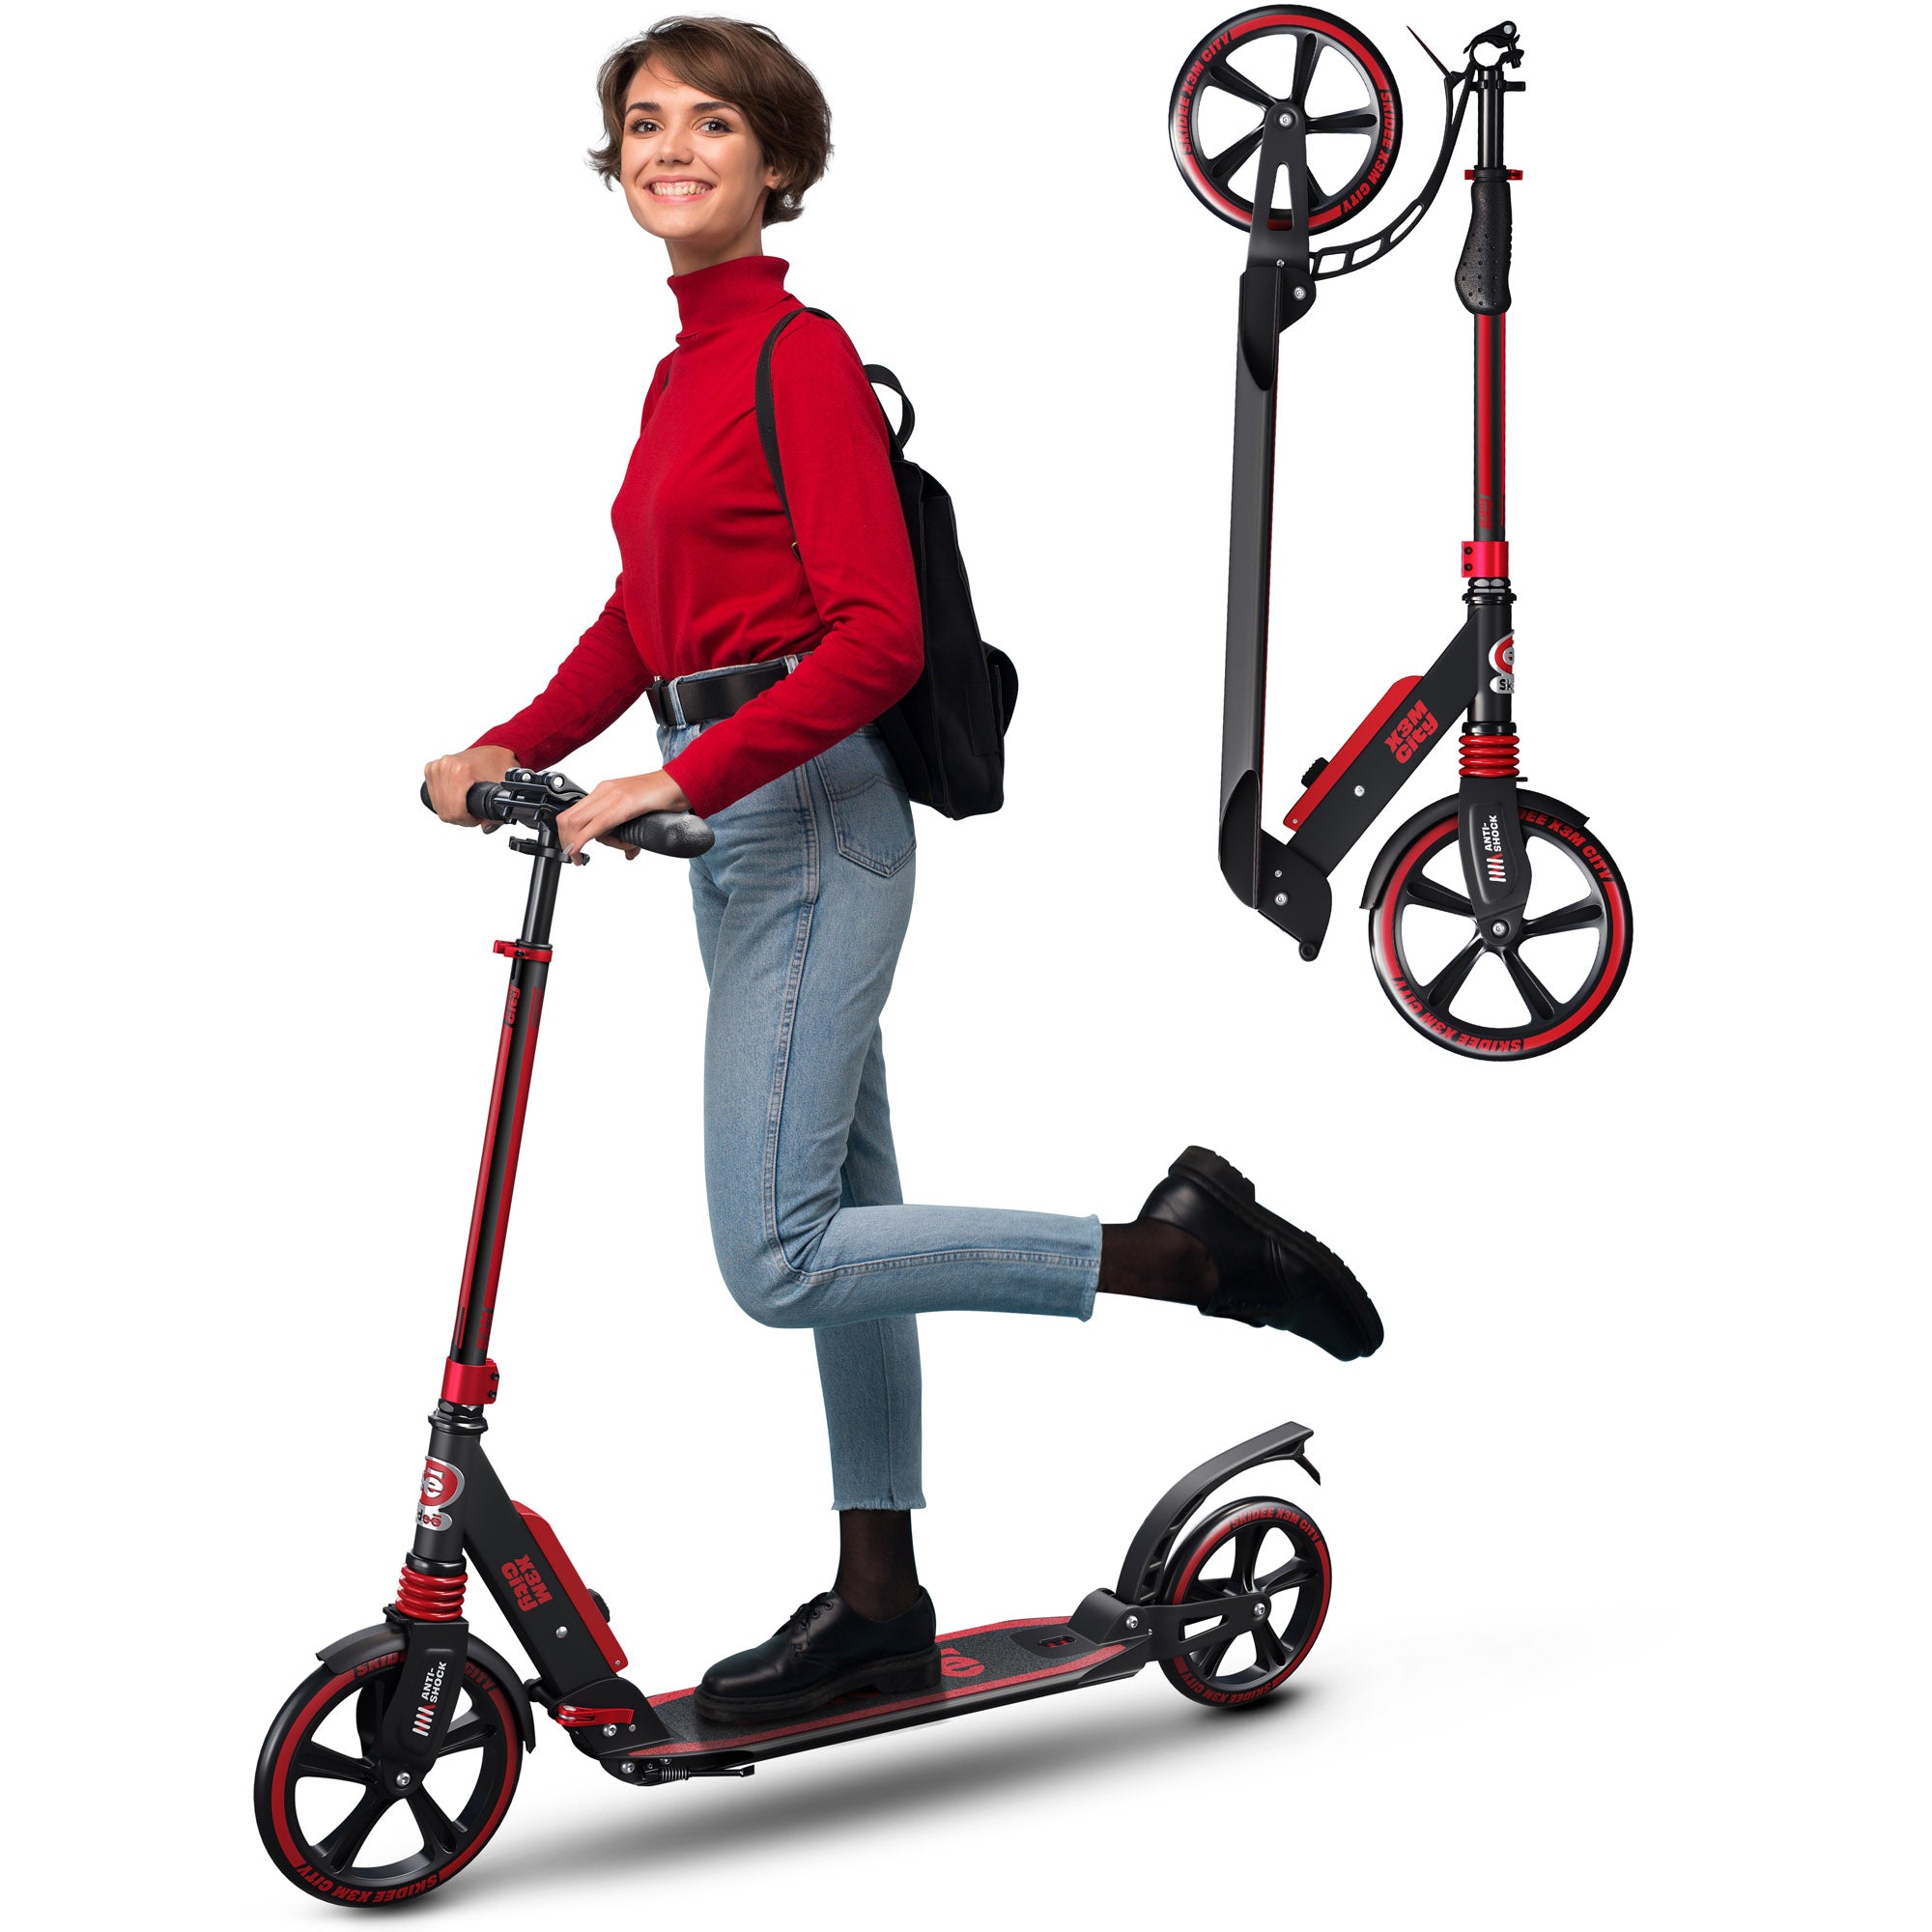 Flybar X3M Kids Scooter Years Up Ages - for Scooters – for - 12 and 6-12 Teens